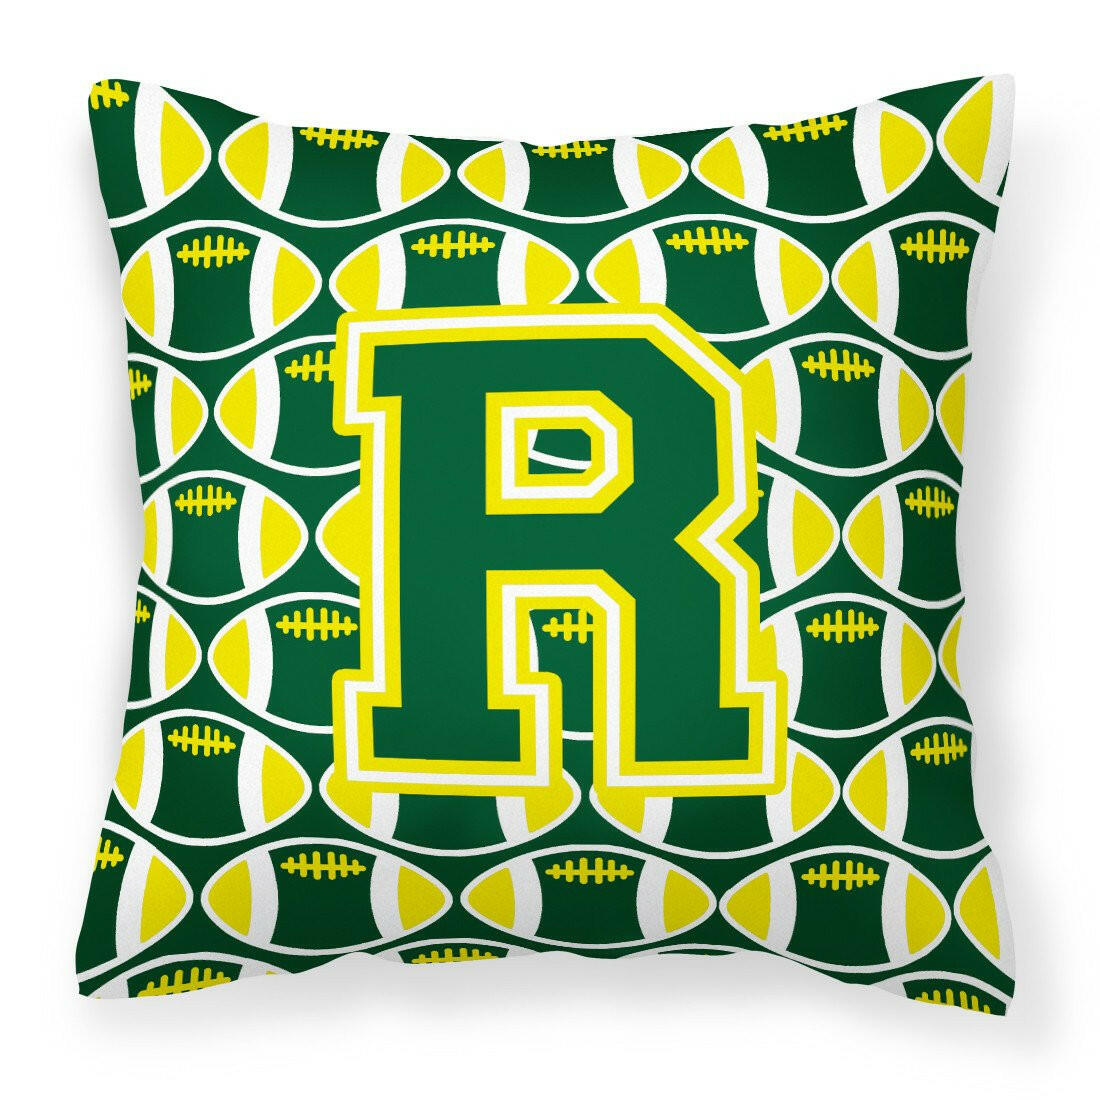 Letter R Football Green and Yellow Fabric Decorative Pillow CJ1075-RPW1414 by Caroline's Treasures